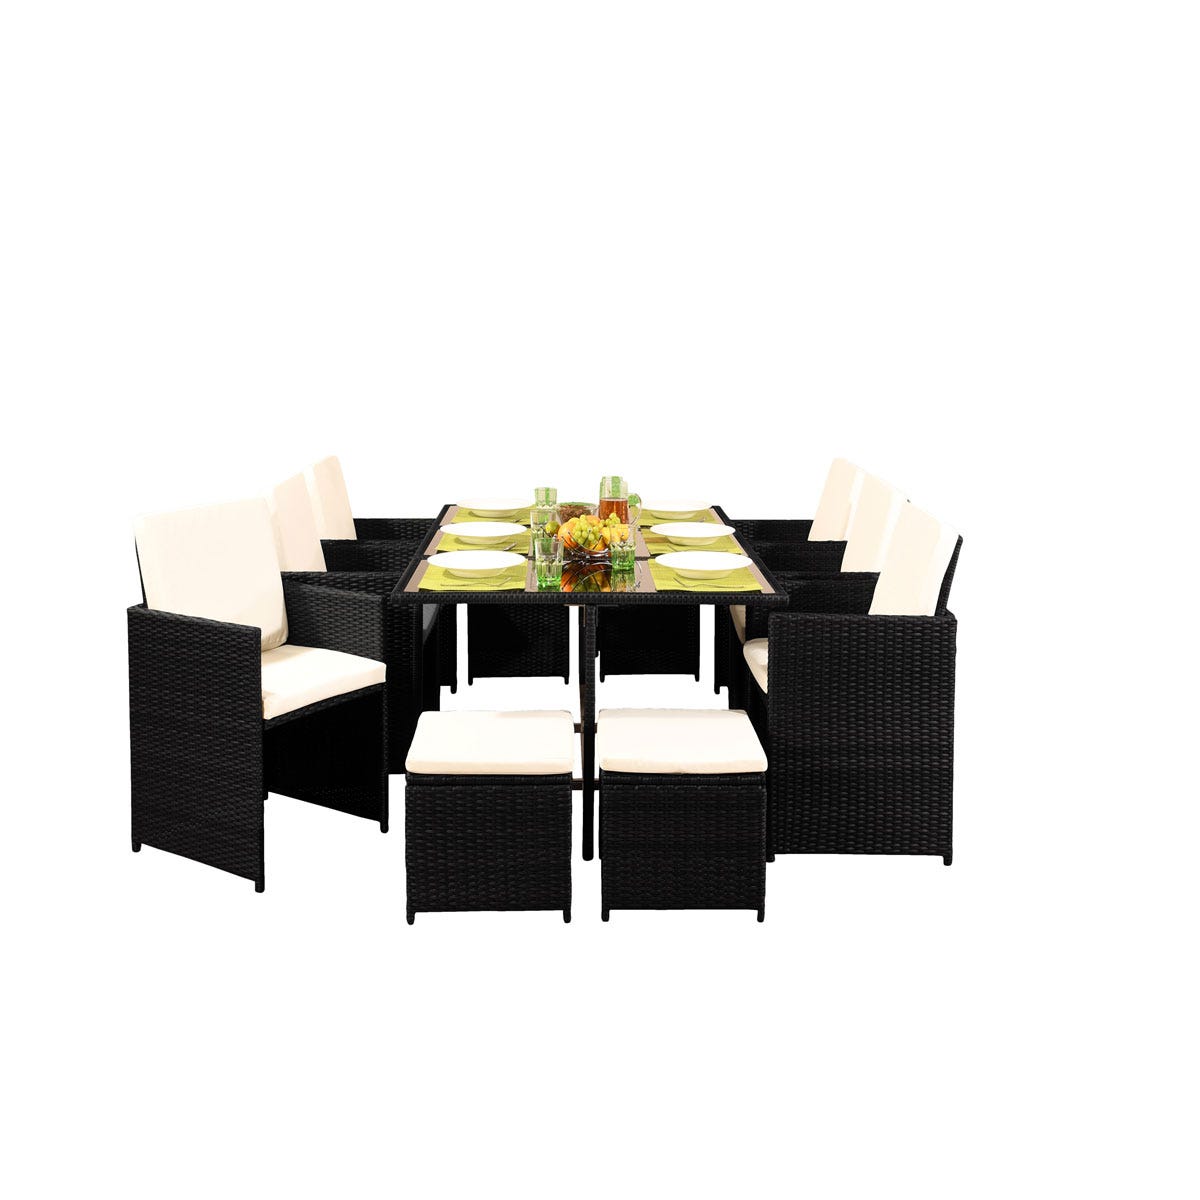 10 Seater Rattan Garden Furniture Set - 6 Chairs 4 Stools & Dining Table With Waterproof Cover - Black